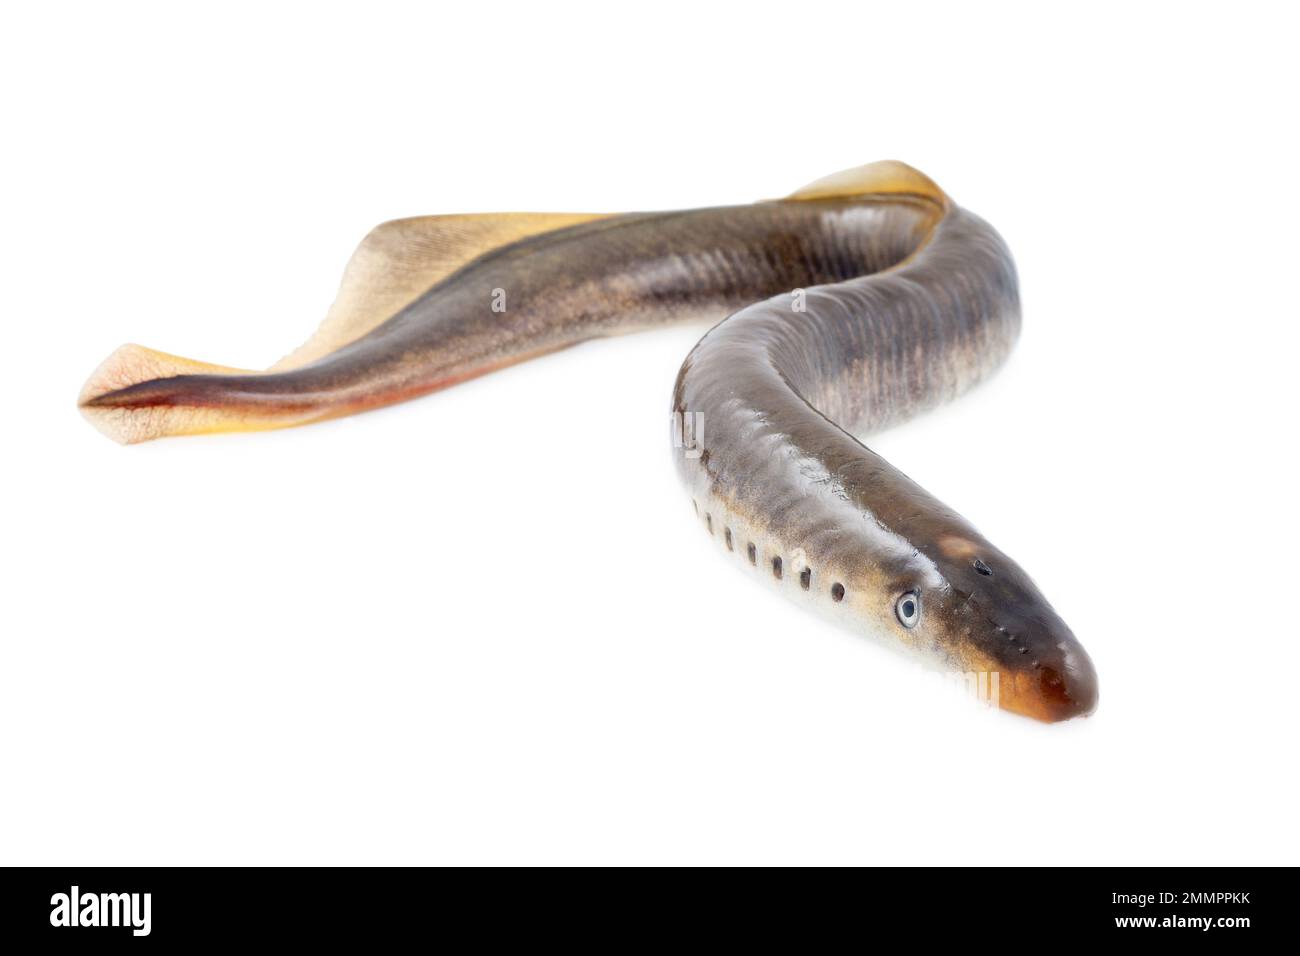 Live lamprey fish on a white background Stock Photo